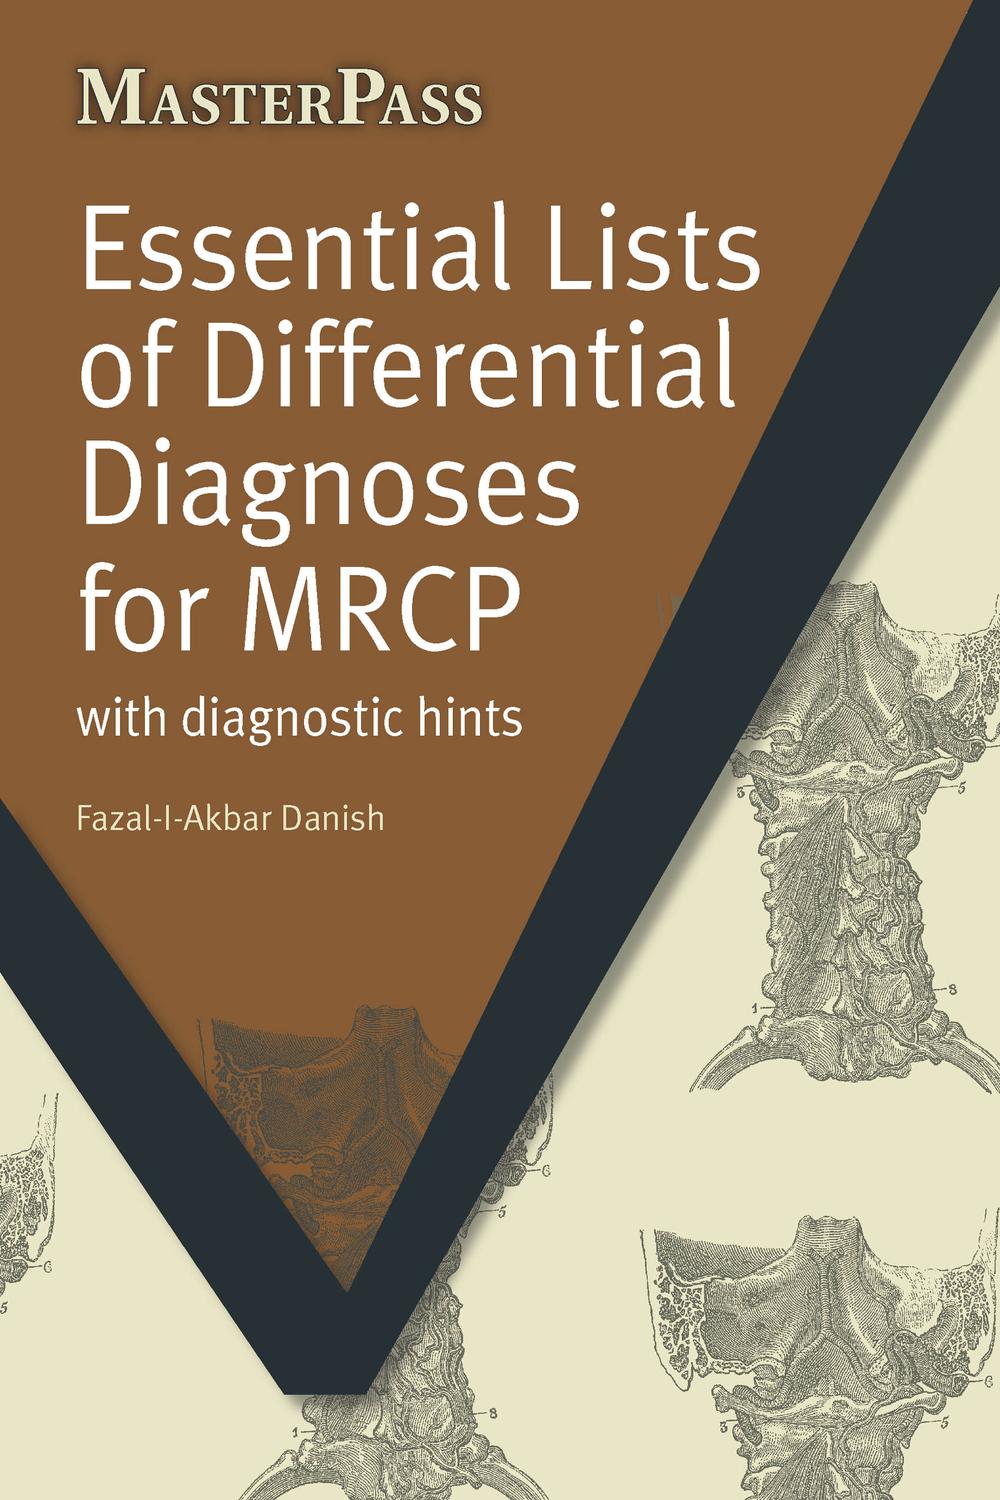 Essential Lists of Differential Diagnoses for MRCP - Fazal-I-Akbar Danish